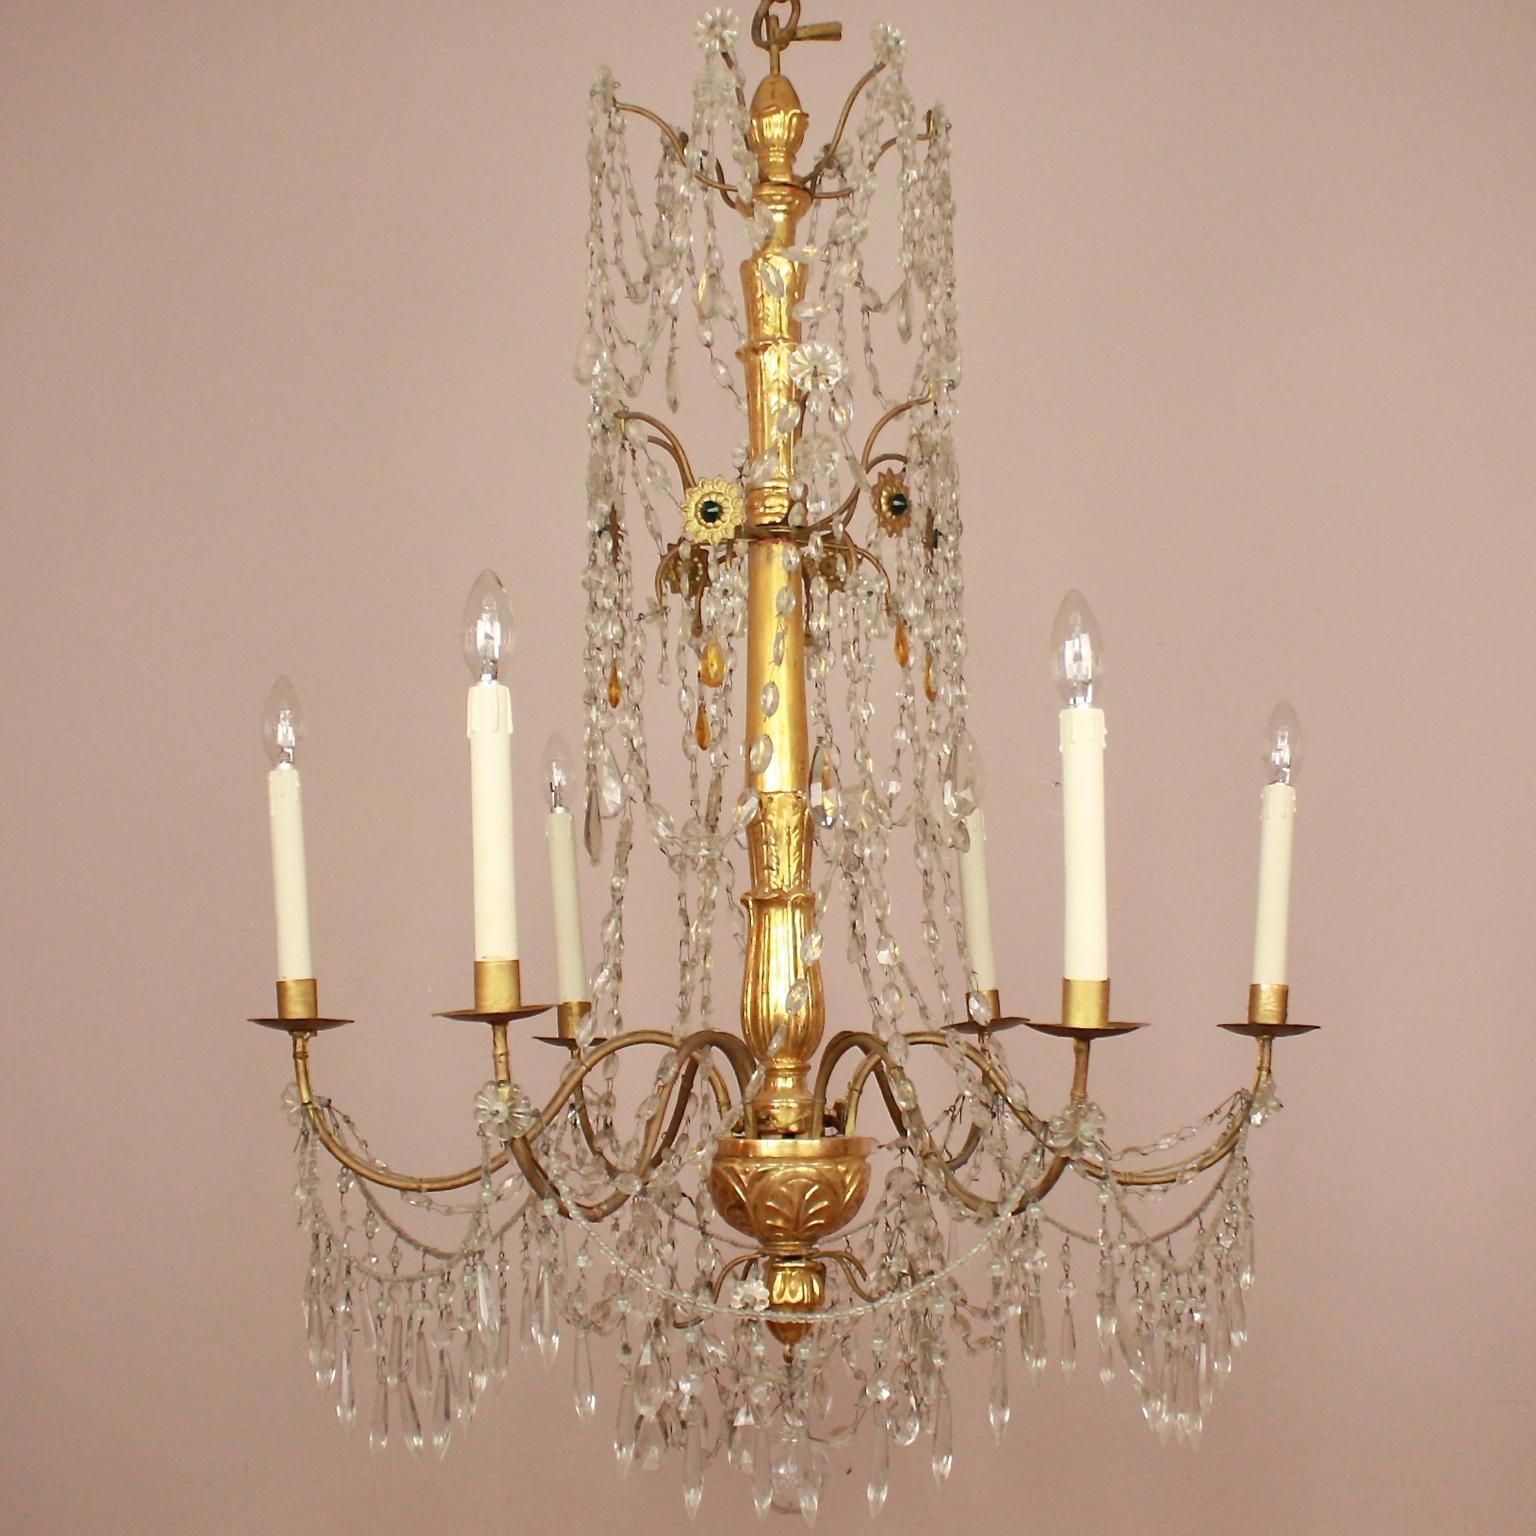 Pair of Late 18th Century Neoclassical Genoa/Italy Giltwood Crystal Chandeliers

A pair of large late 18th century giltwood, giltmetal cut crystal and coloured glass chandeliers from Genoa. Each with a foliate-wrapped slender baluster-shaped